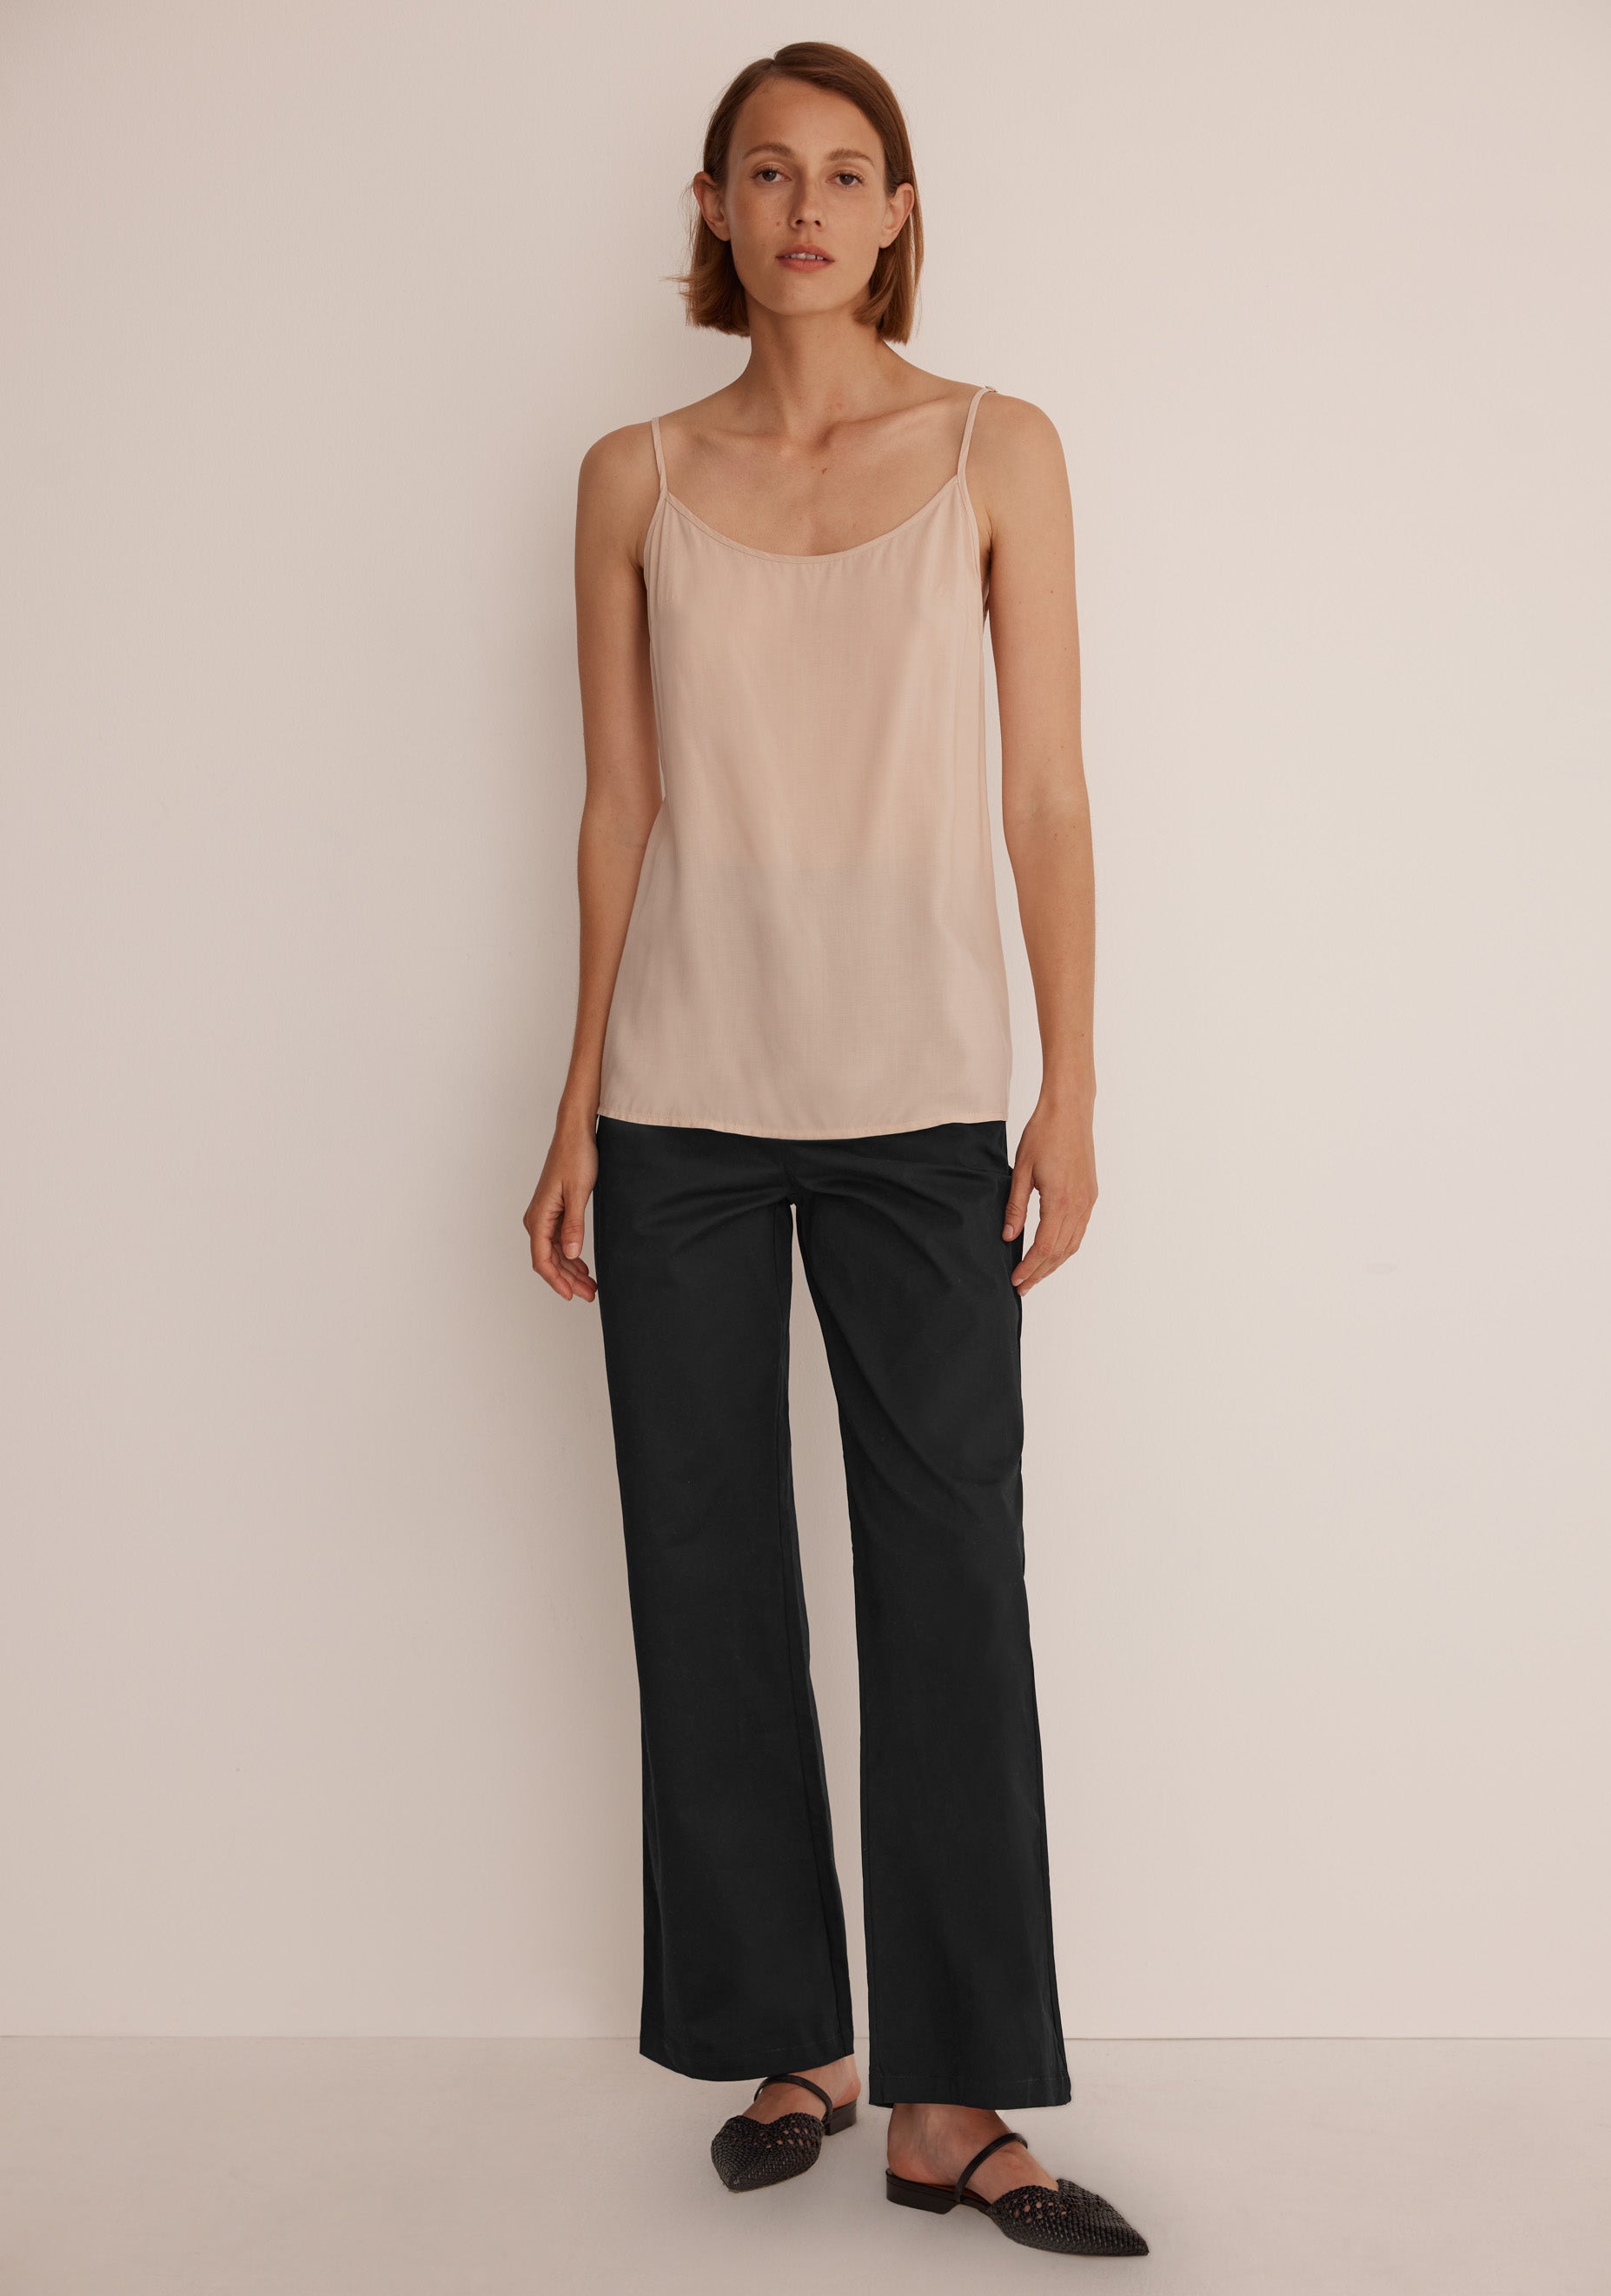 Camisole Nude - I Am More Scarsdale